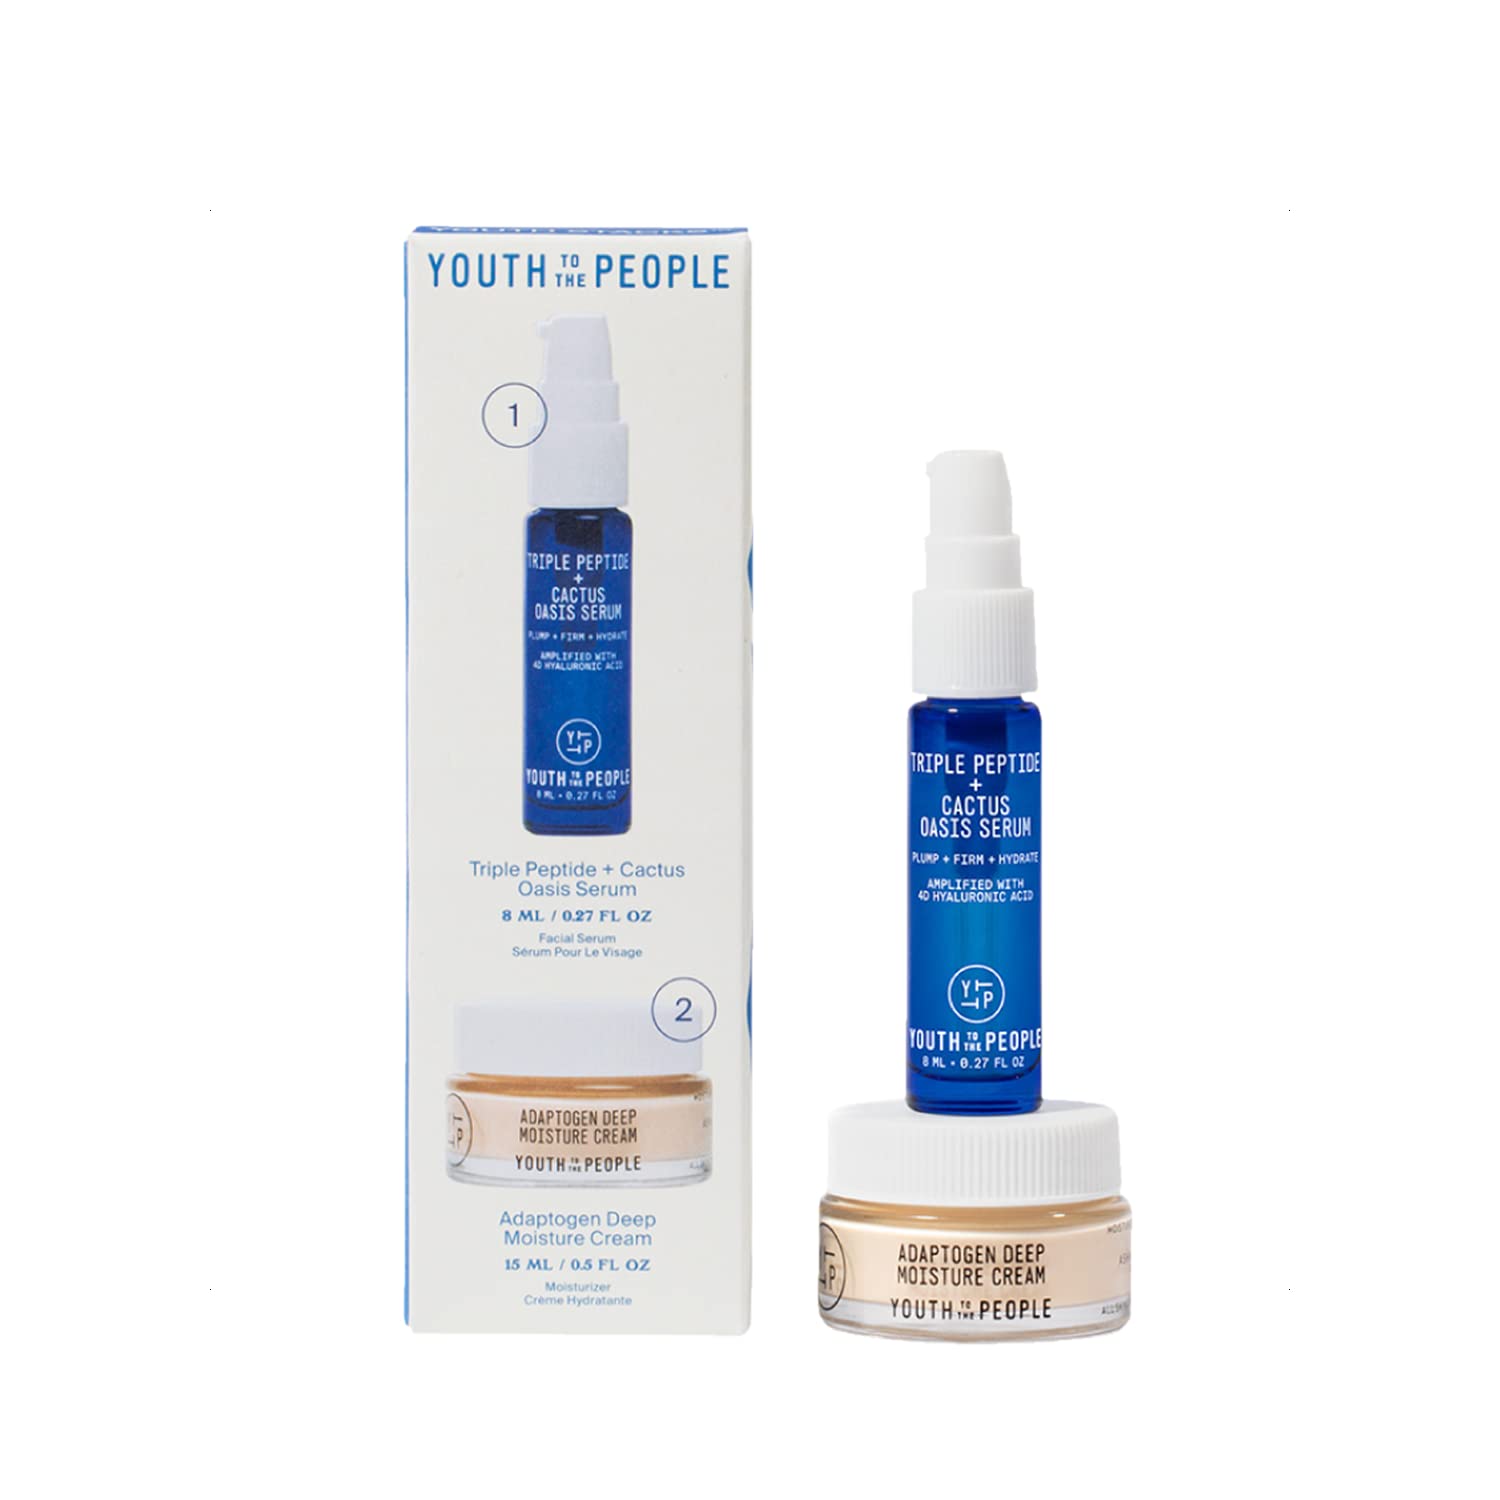 Youth To The People Plump It Up Youth Stack - Travel Size Triple Peptide + Cactus Oasis Serum (8ml) Adaptogen Deep Moisture Cream (15ml) - Vegan Face Serum + Face Cream Skincare Gift Set